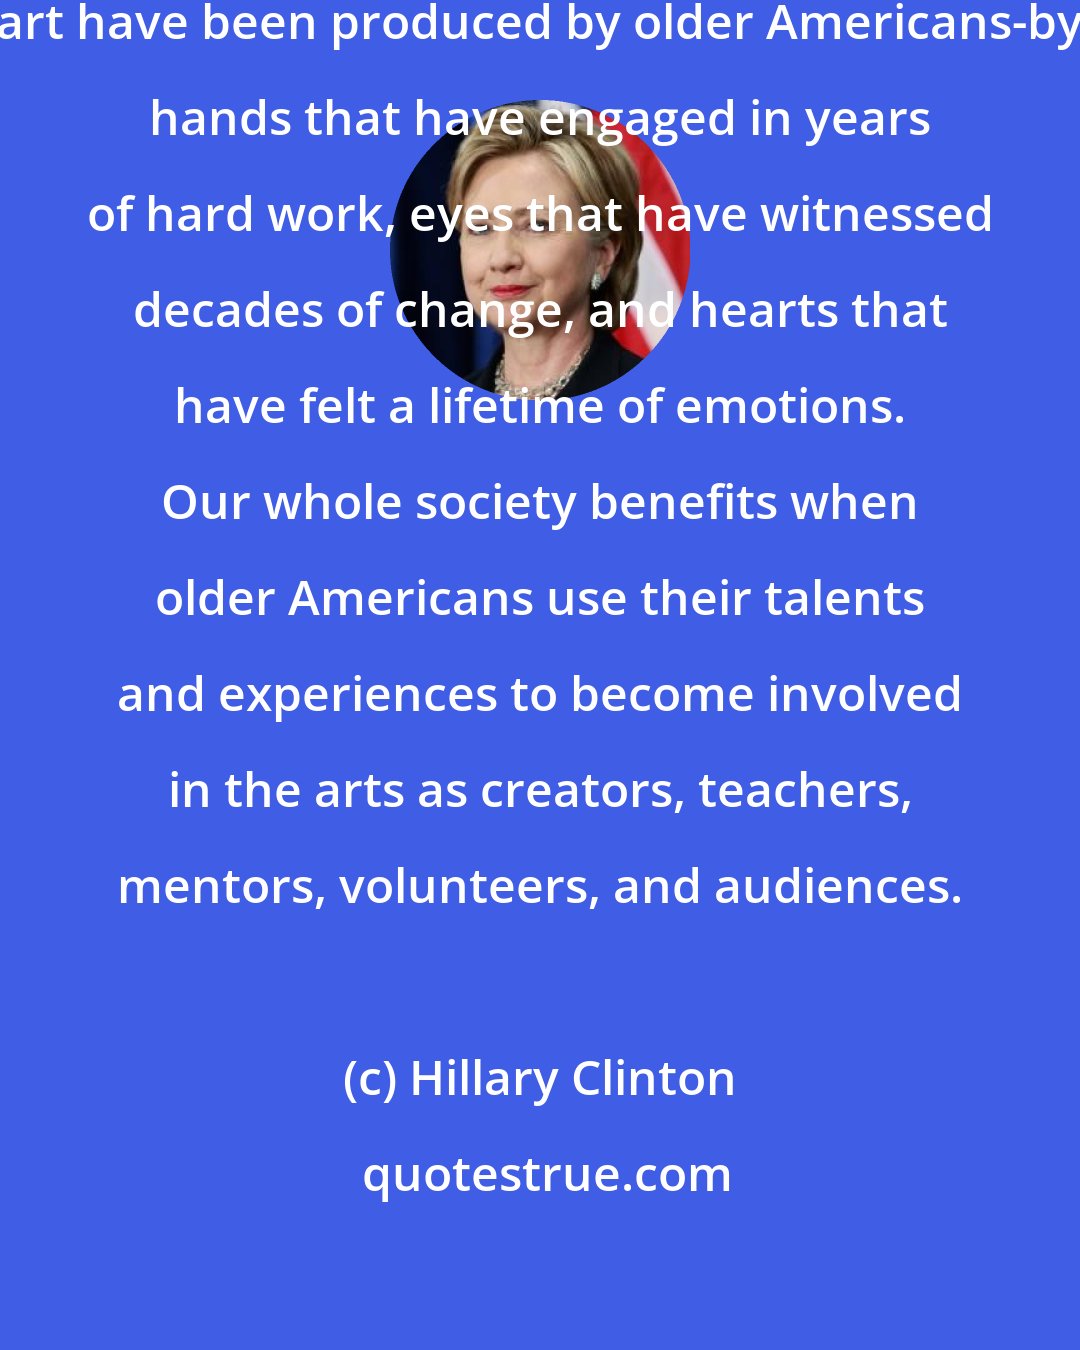 Hillary Clinton: Some of our most powerful works of art have been produced by older Americans-by hands that have engaged in years of hard work, eyes that have witnessed decades of change, and hearts that have felt a lifetime of emotions. Our whole society benefits when older Americans use their talents and experiences to become involved in the arts as creators, teachers, mentors, volunteers, and audiences.